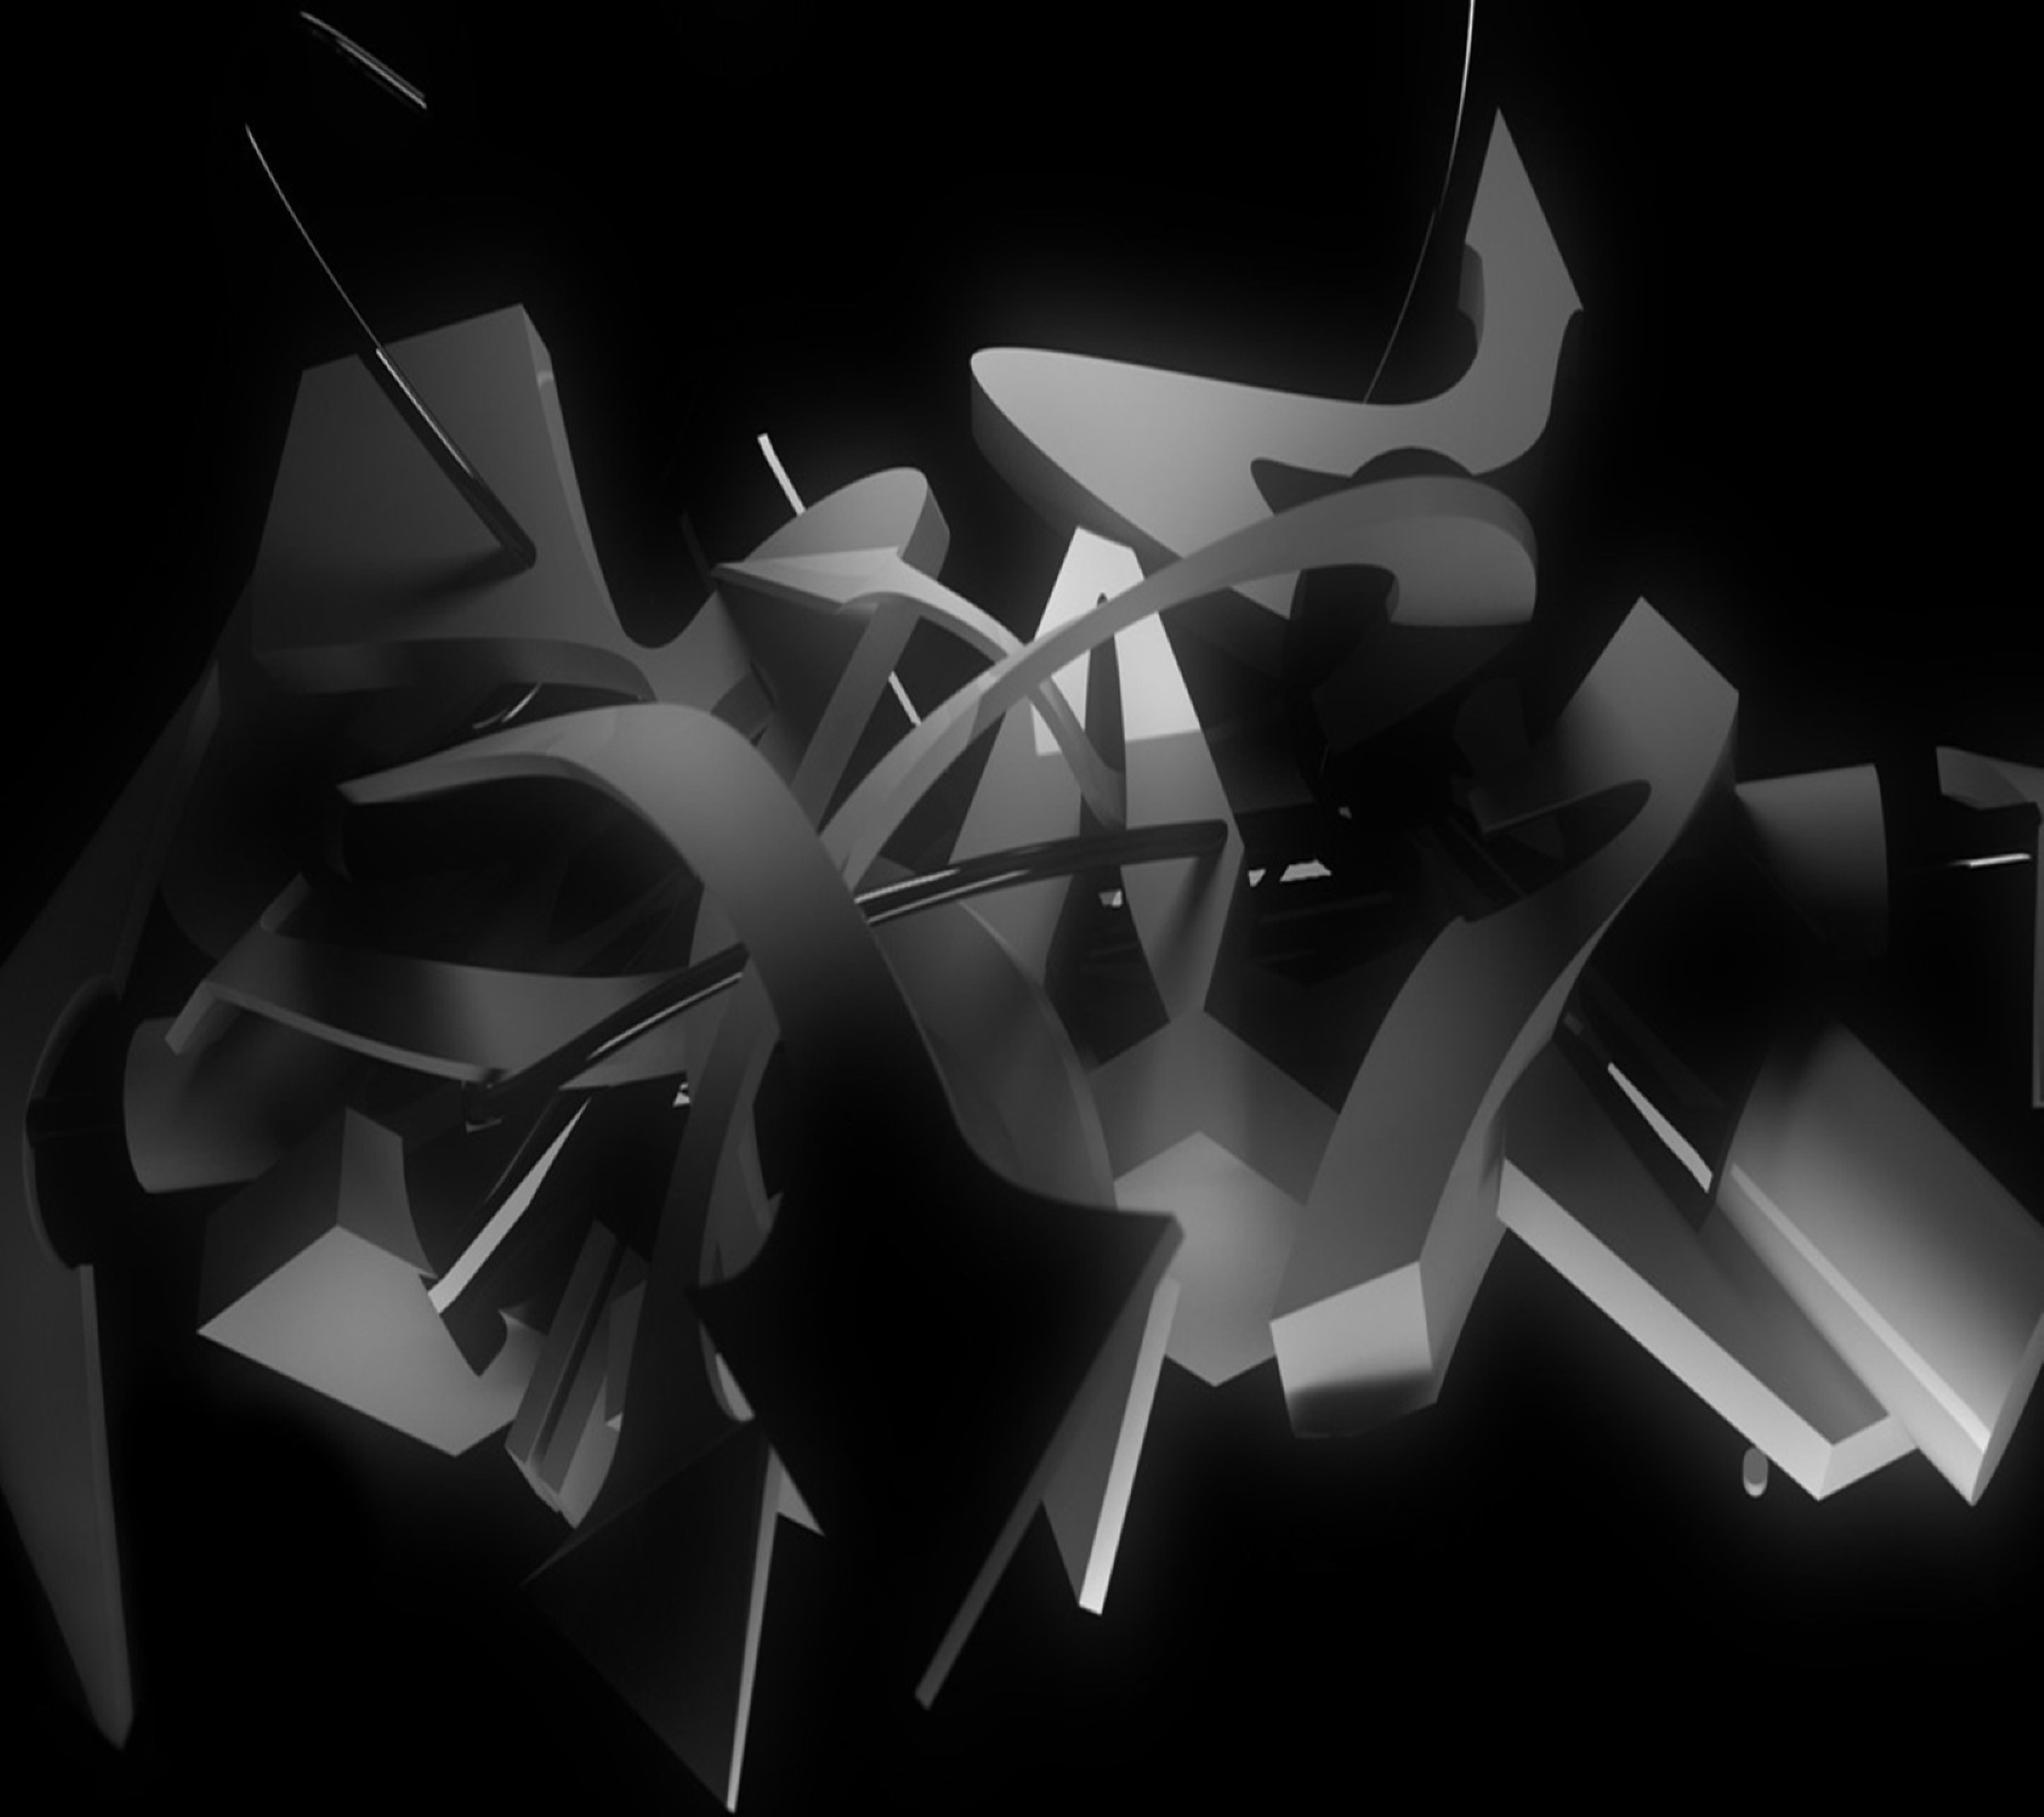 2160x1920 ABSTRACT DESIGN - Mobile wallpaper @mobile9 | #3d #abstract #shapes